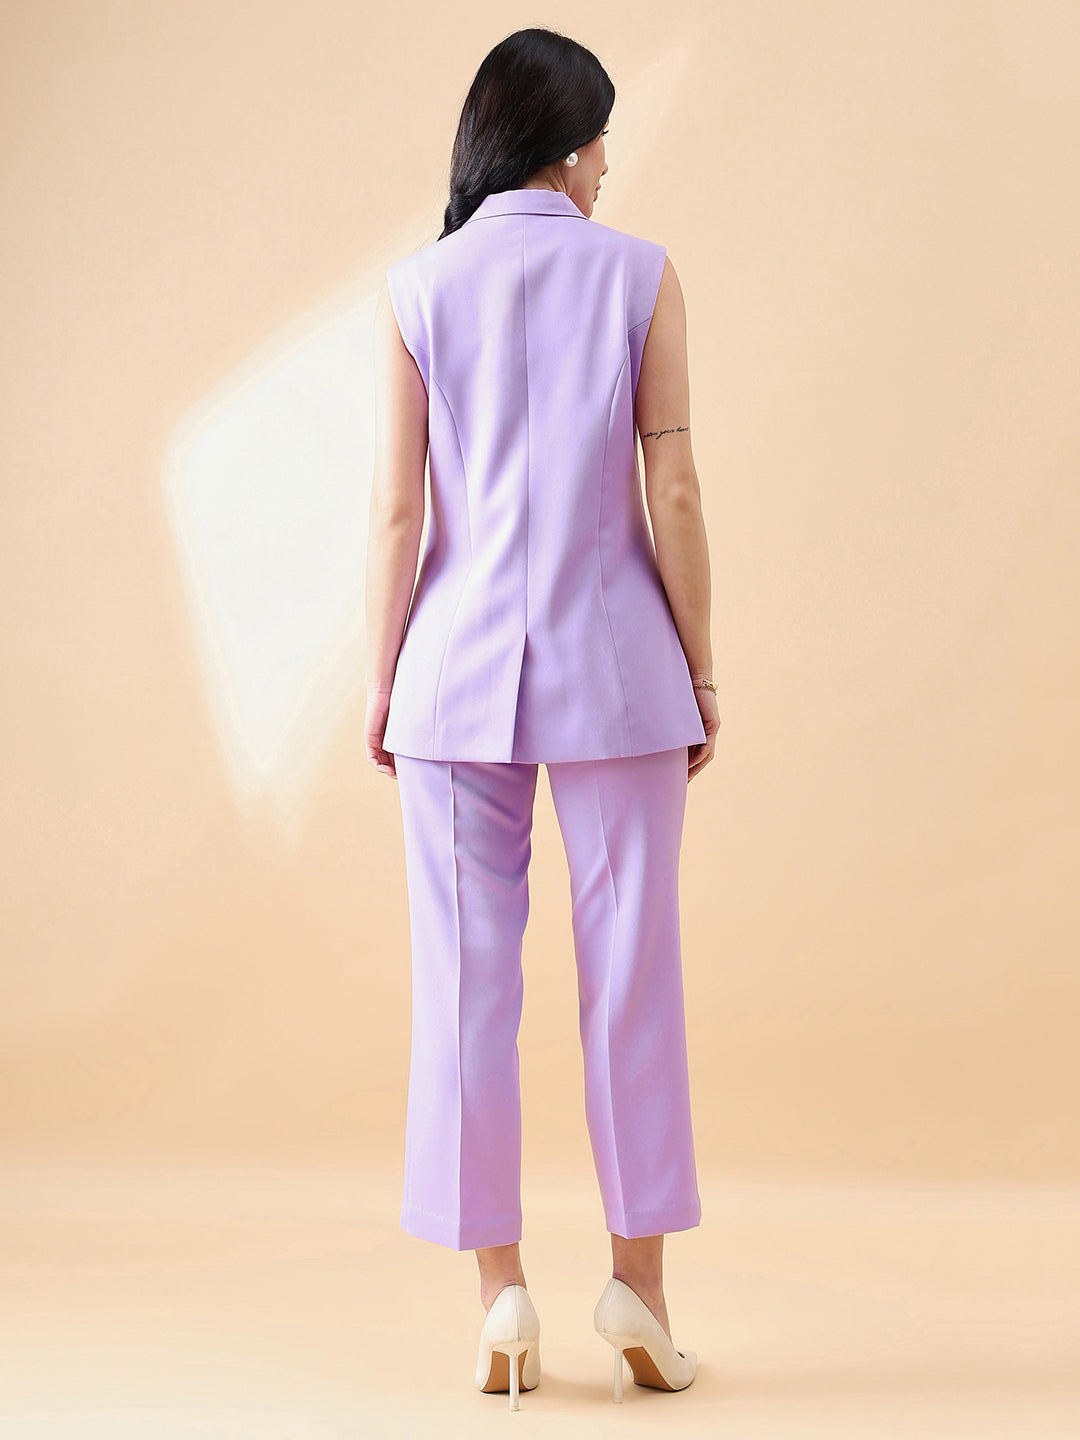 Lavender-Polyester-Cut-Sleeve-Notch-Collar-Stretch-Pant-Suit